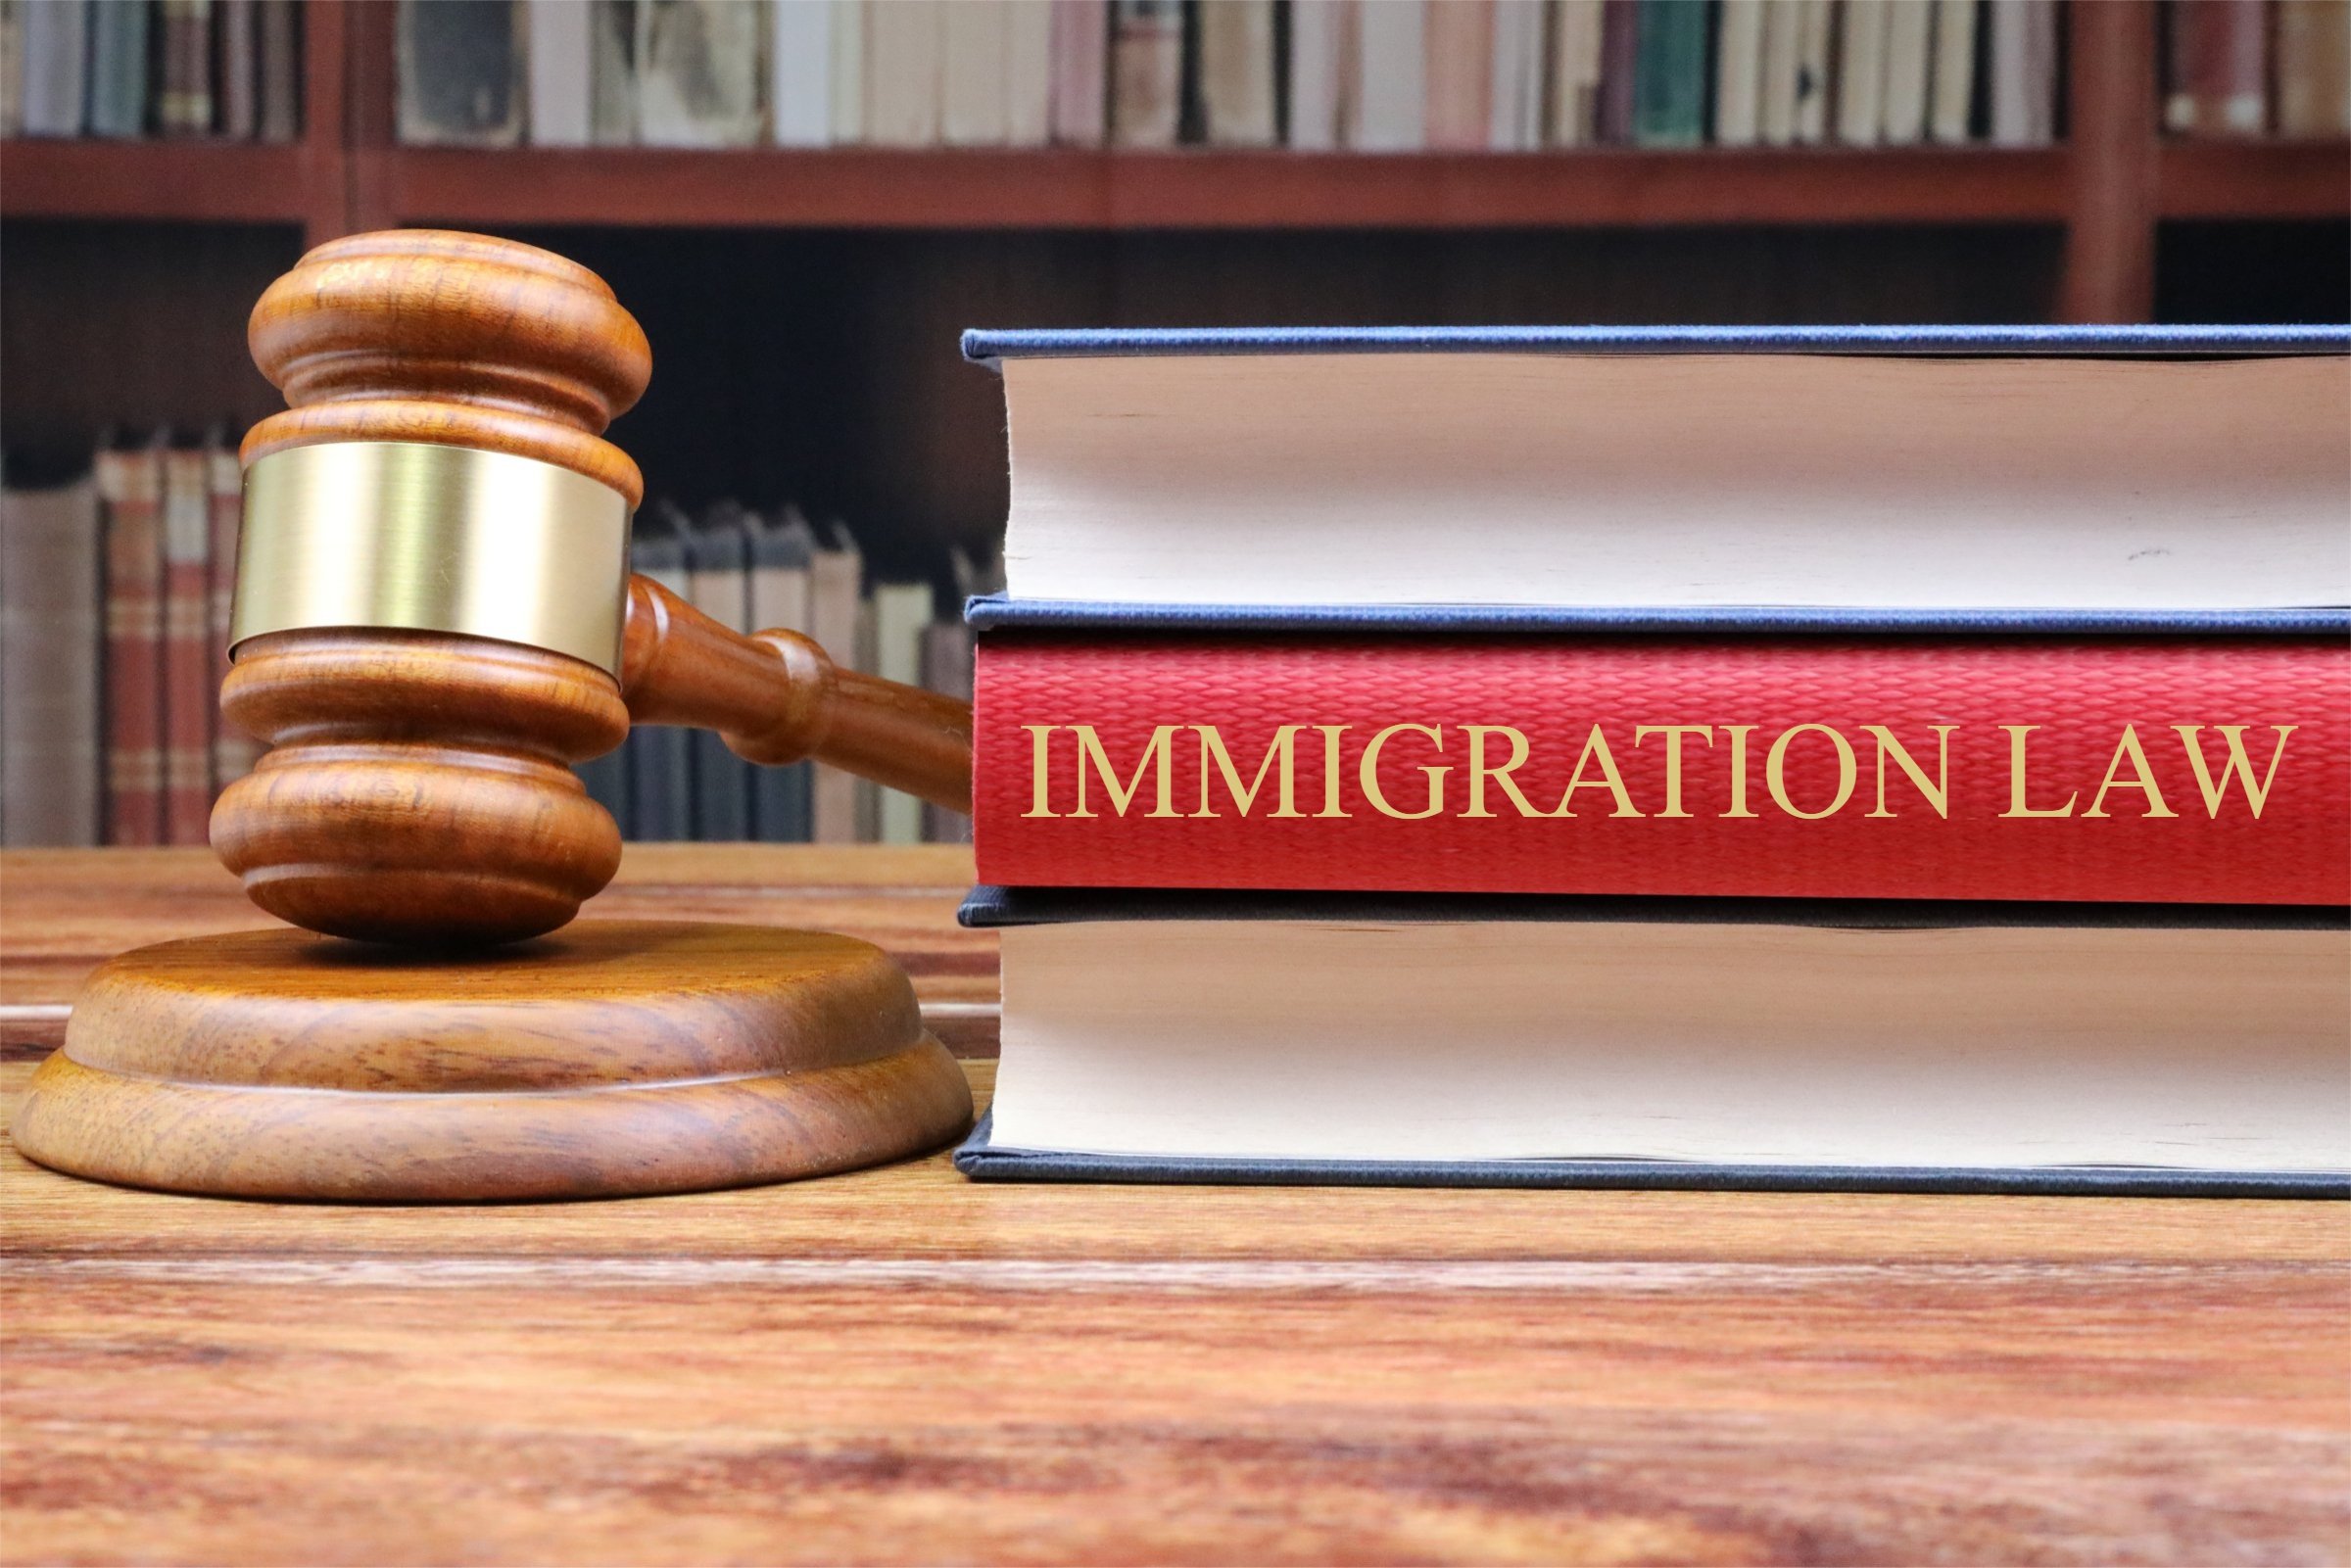 Free of Charge Creative Commons immigration law Image Legal 8